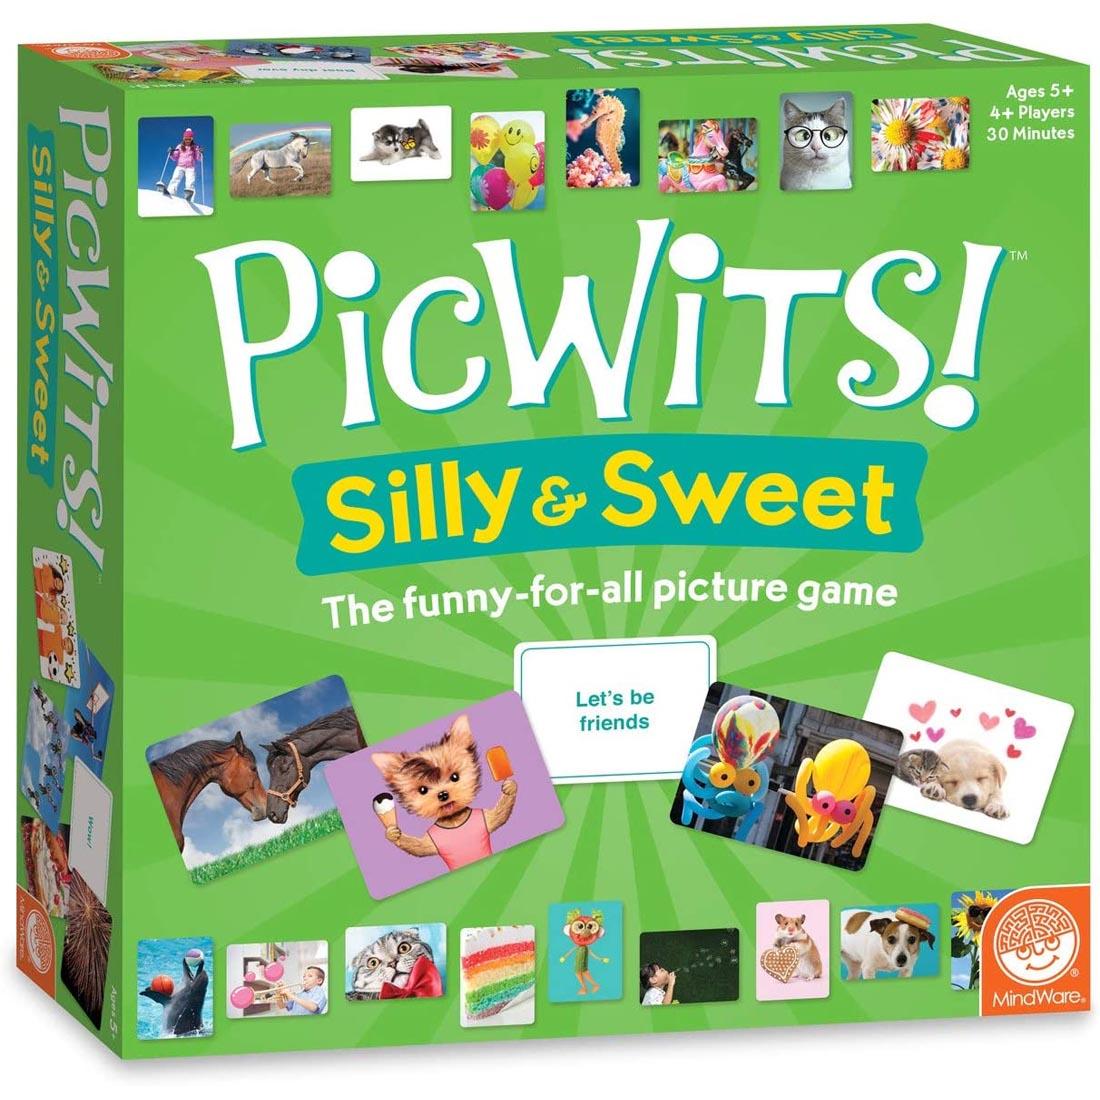 PicWits! Silly and Sweet Photo Caption Game